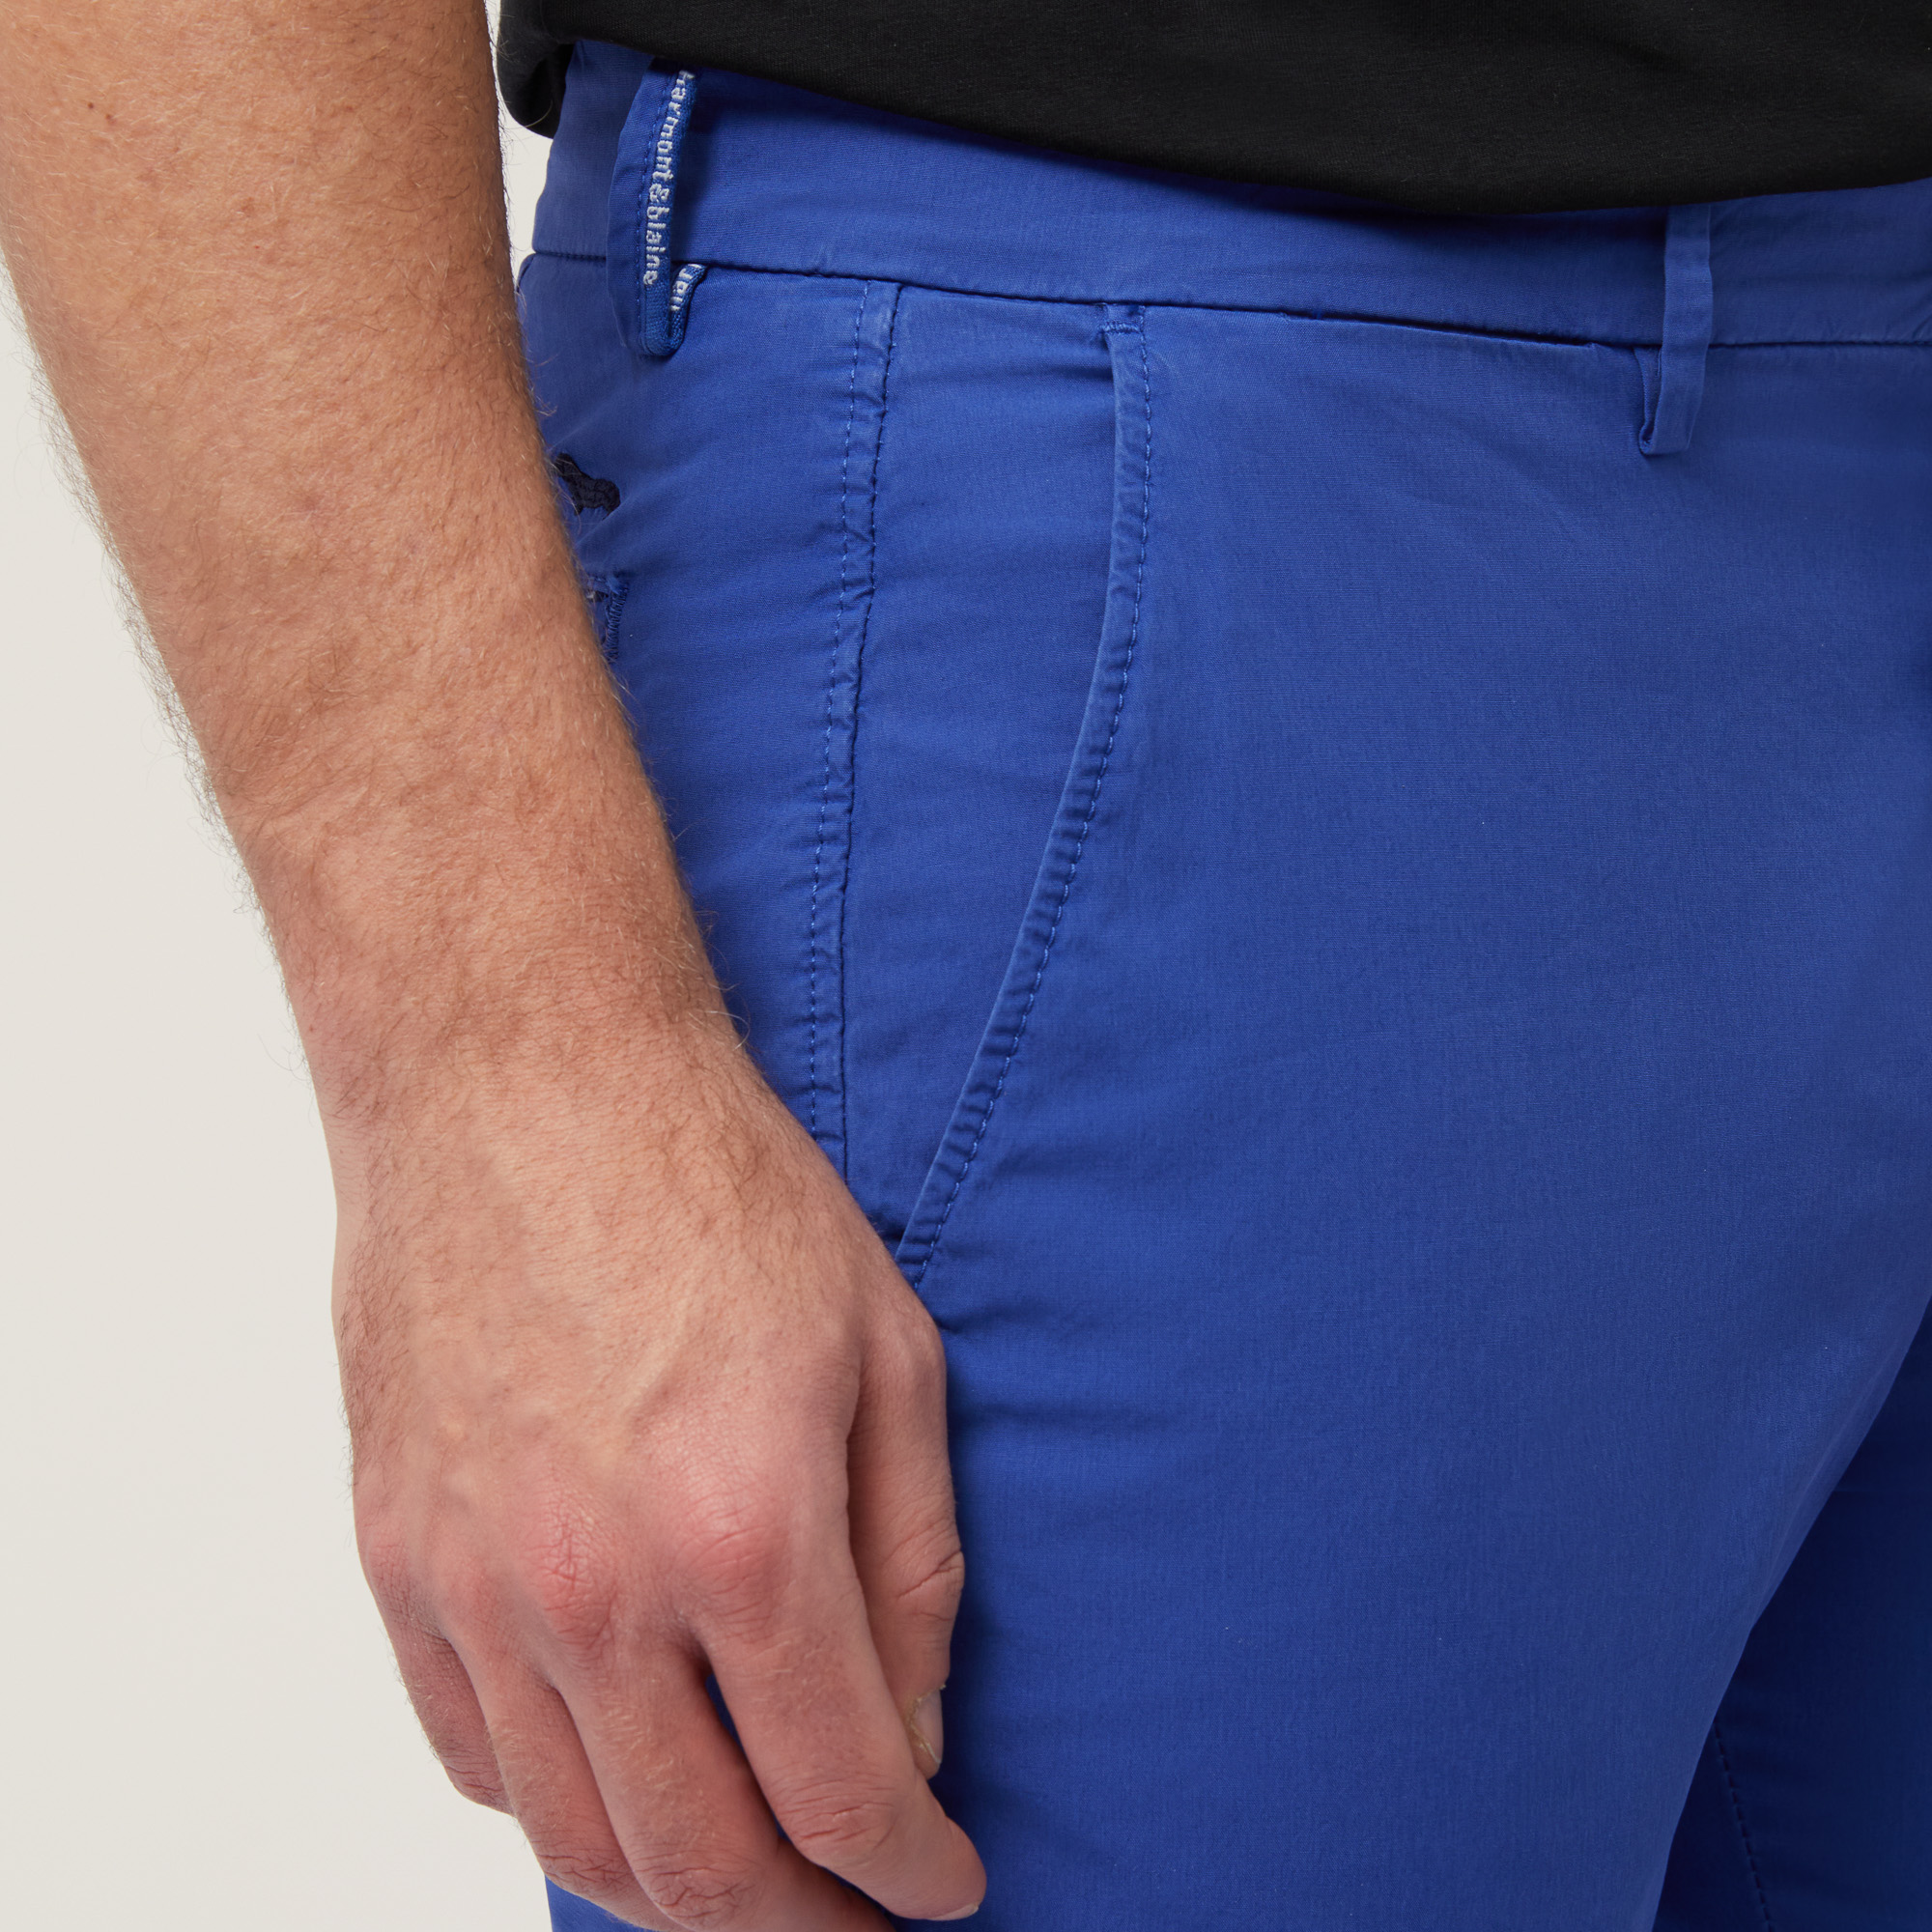 Chino-Hose Narrow Fit, Hortensie, large image number 2